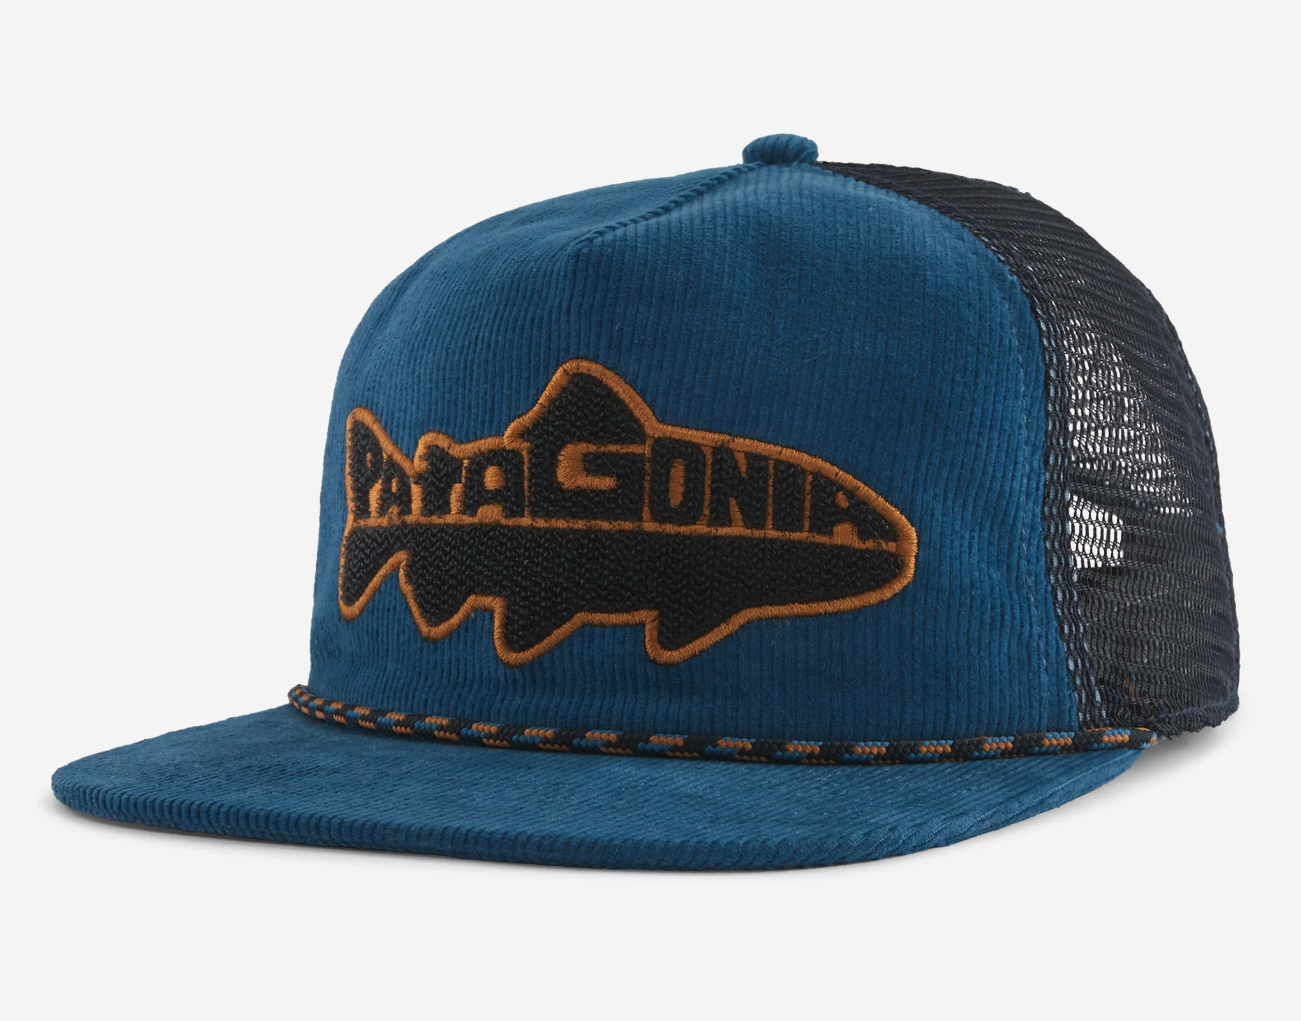 https://www.theflyfishers.com/Content/files/Patagonia/FlyCatcherHat33475/WIBE.png